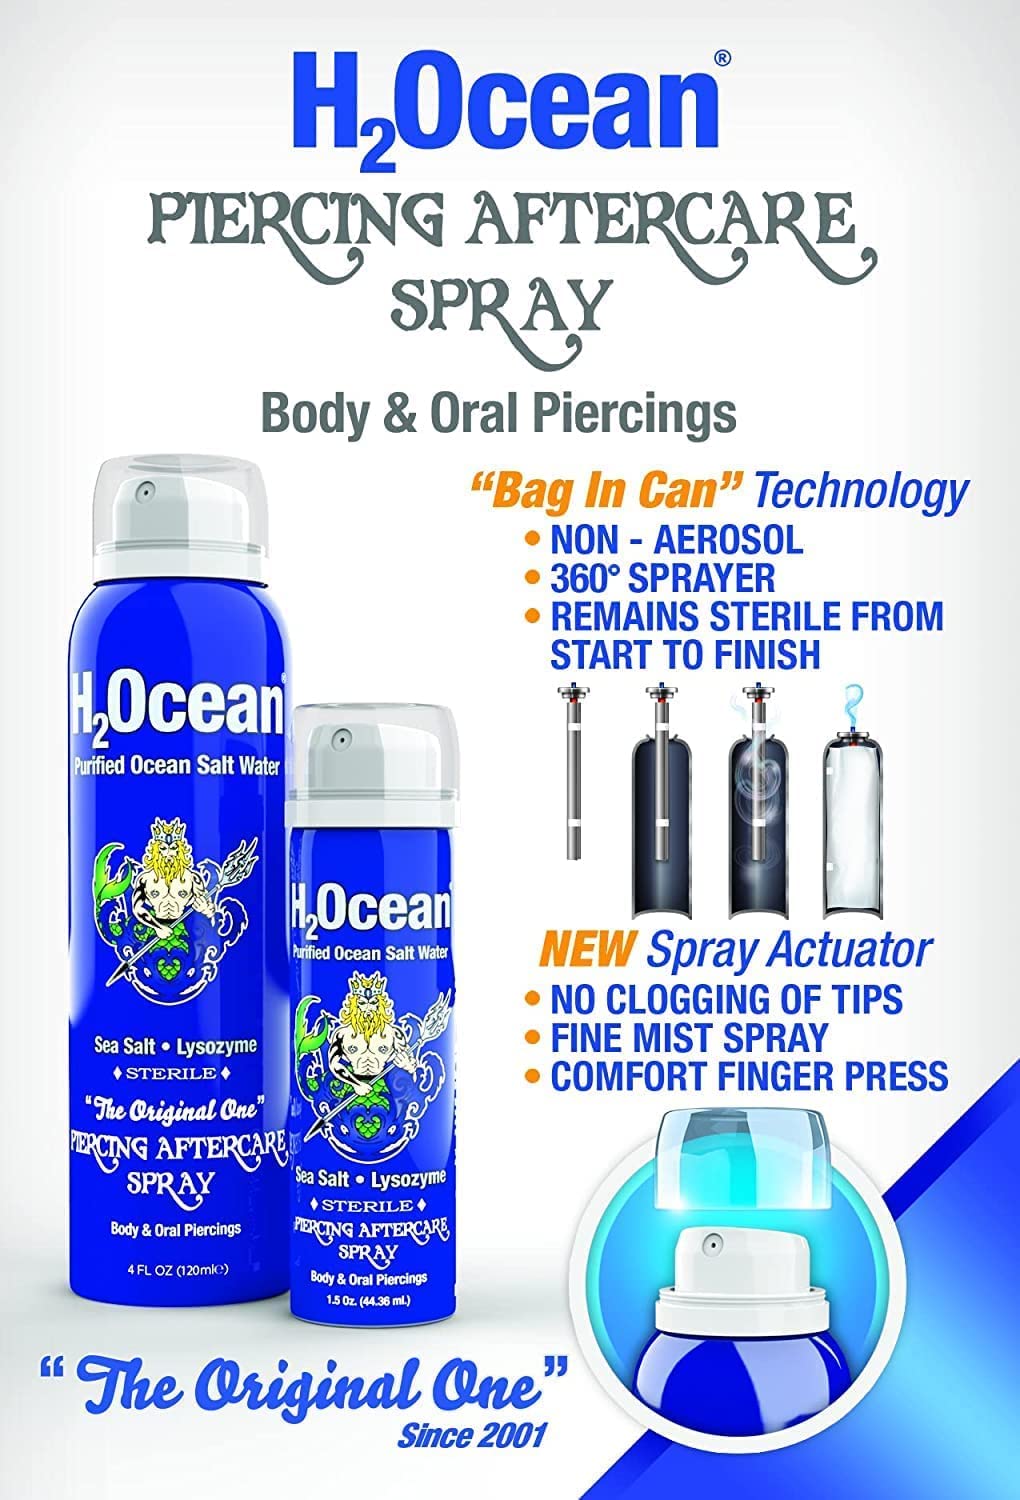 H2Ocean Piercing Aftercare Spray 4oz Set of 2 Sea Salt Saline Keloid & Bump Treatment, Wound Care Spray Organic Wound Wash For Ear, Nose, Naval, Oral Body Piercings